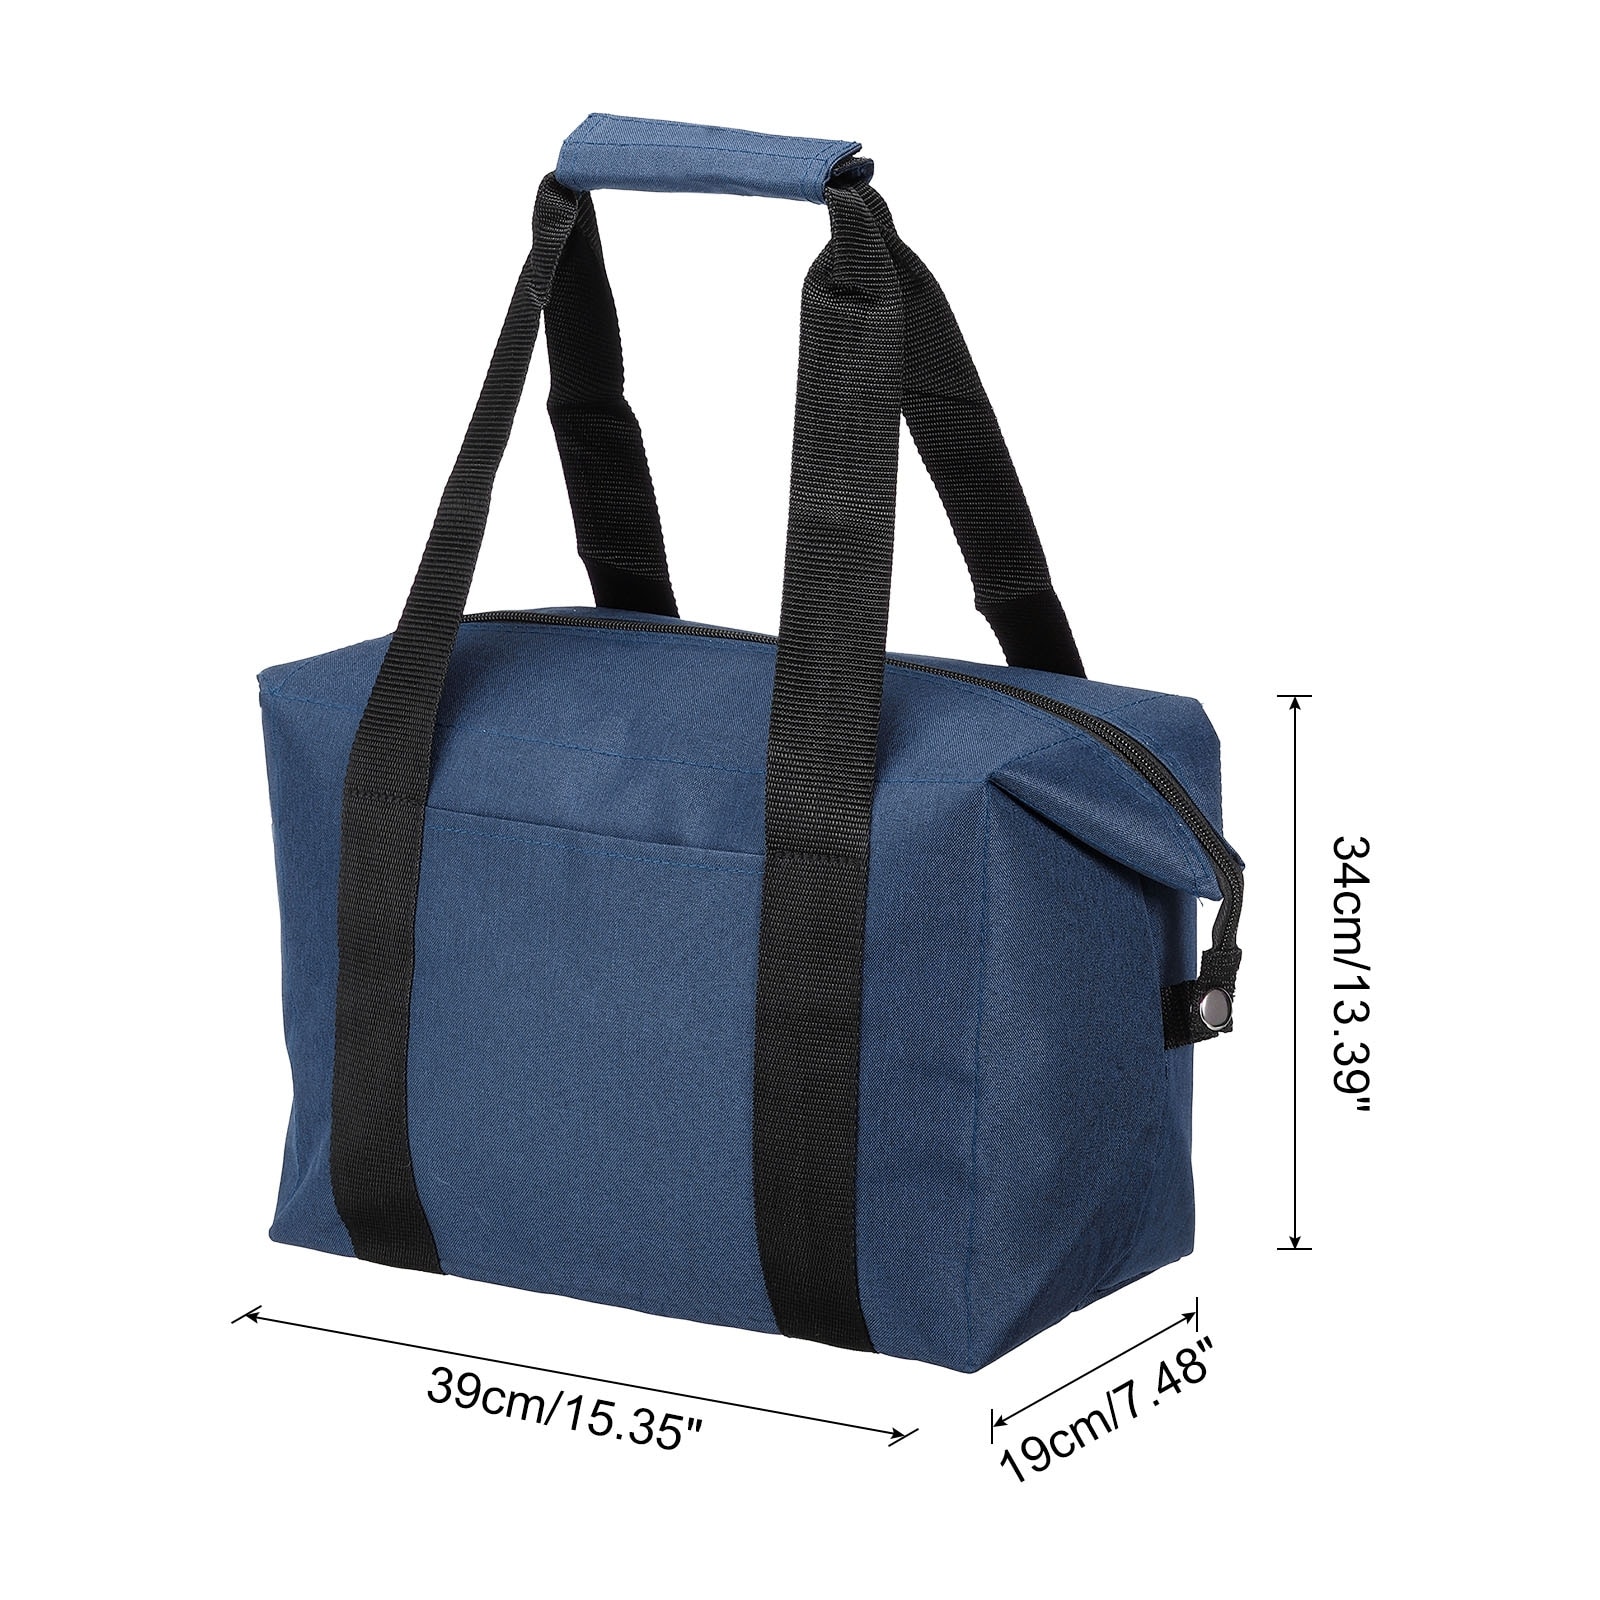 https://ak1.ostkcdn.com/images/products/is/images/direct/5ddd94702ef0e2aa6f29203c7335fd75198f3131/Insulated-Lunch-Bag%2C-Lunch-Tote-Bag%2C-13.39%22x7.48%22x15.35%22.jpg